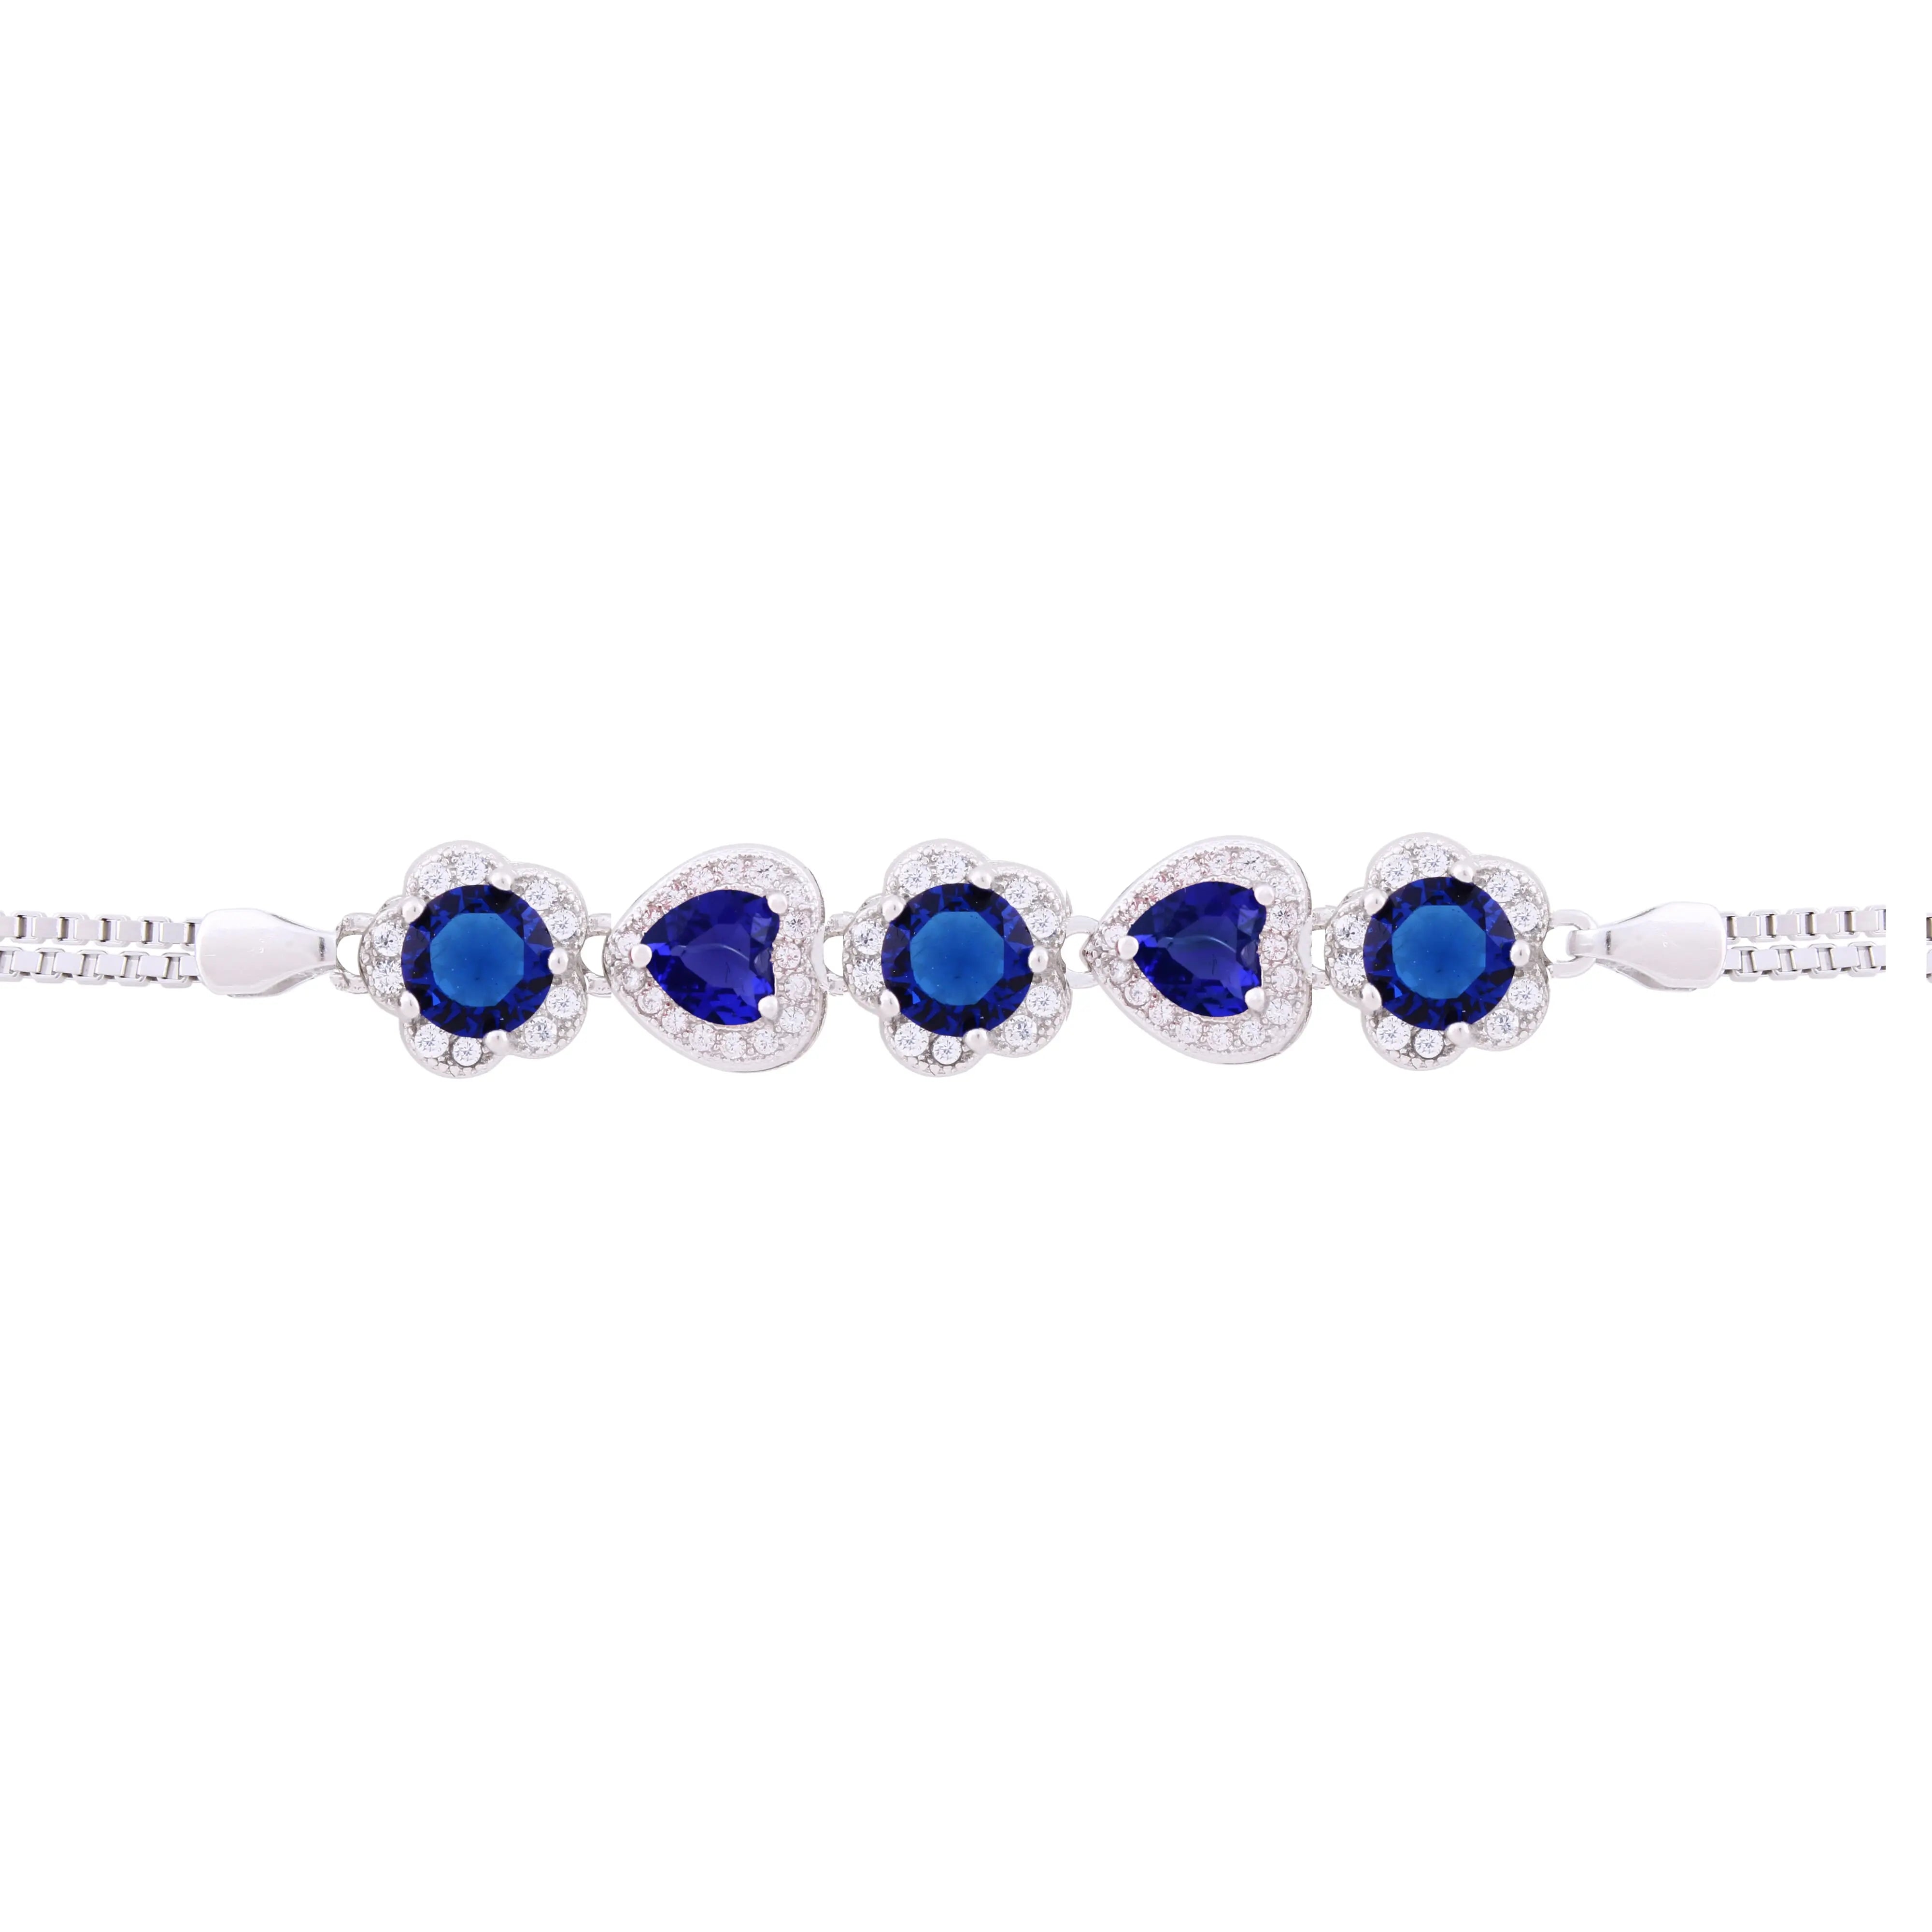 Asfour Box Chain Bracelet With Blue Zircon Stones in 925 Sterling Silver